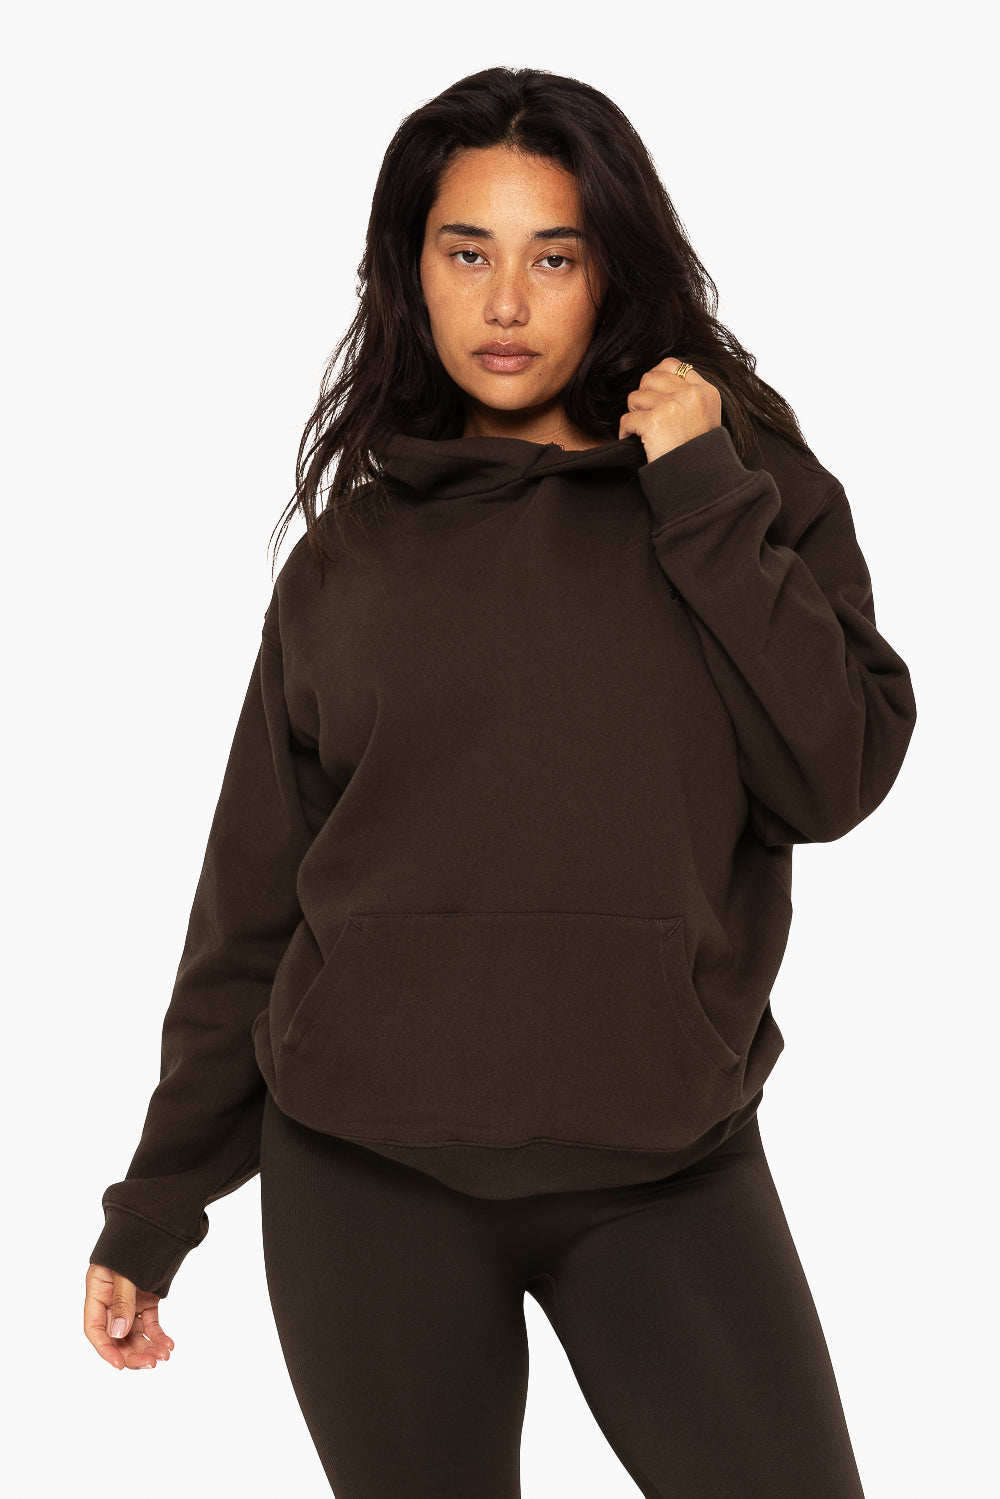 SET™ EMBROIDERED HEAVYWEIGHT SWEATS HOODIE IN ESPRESSO